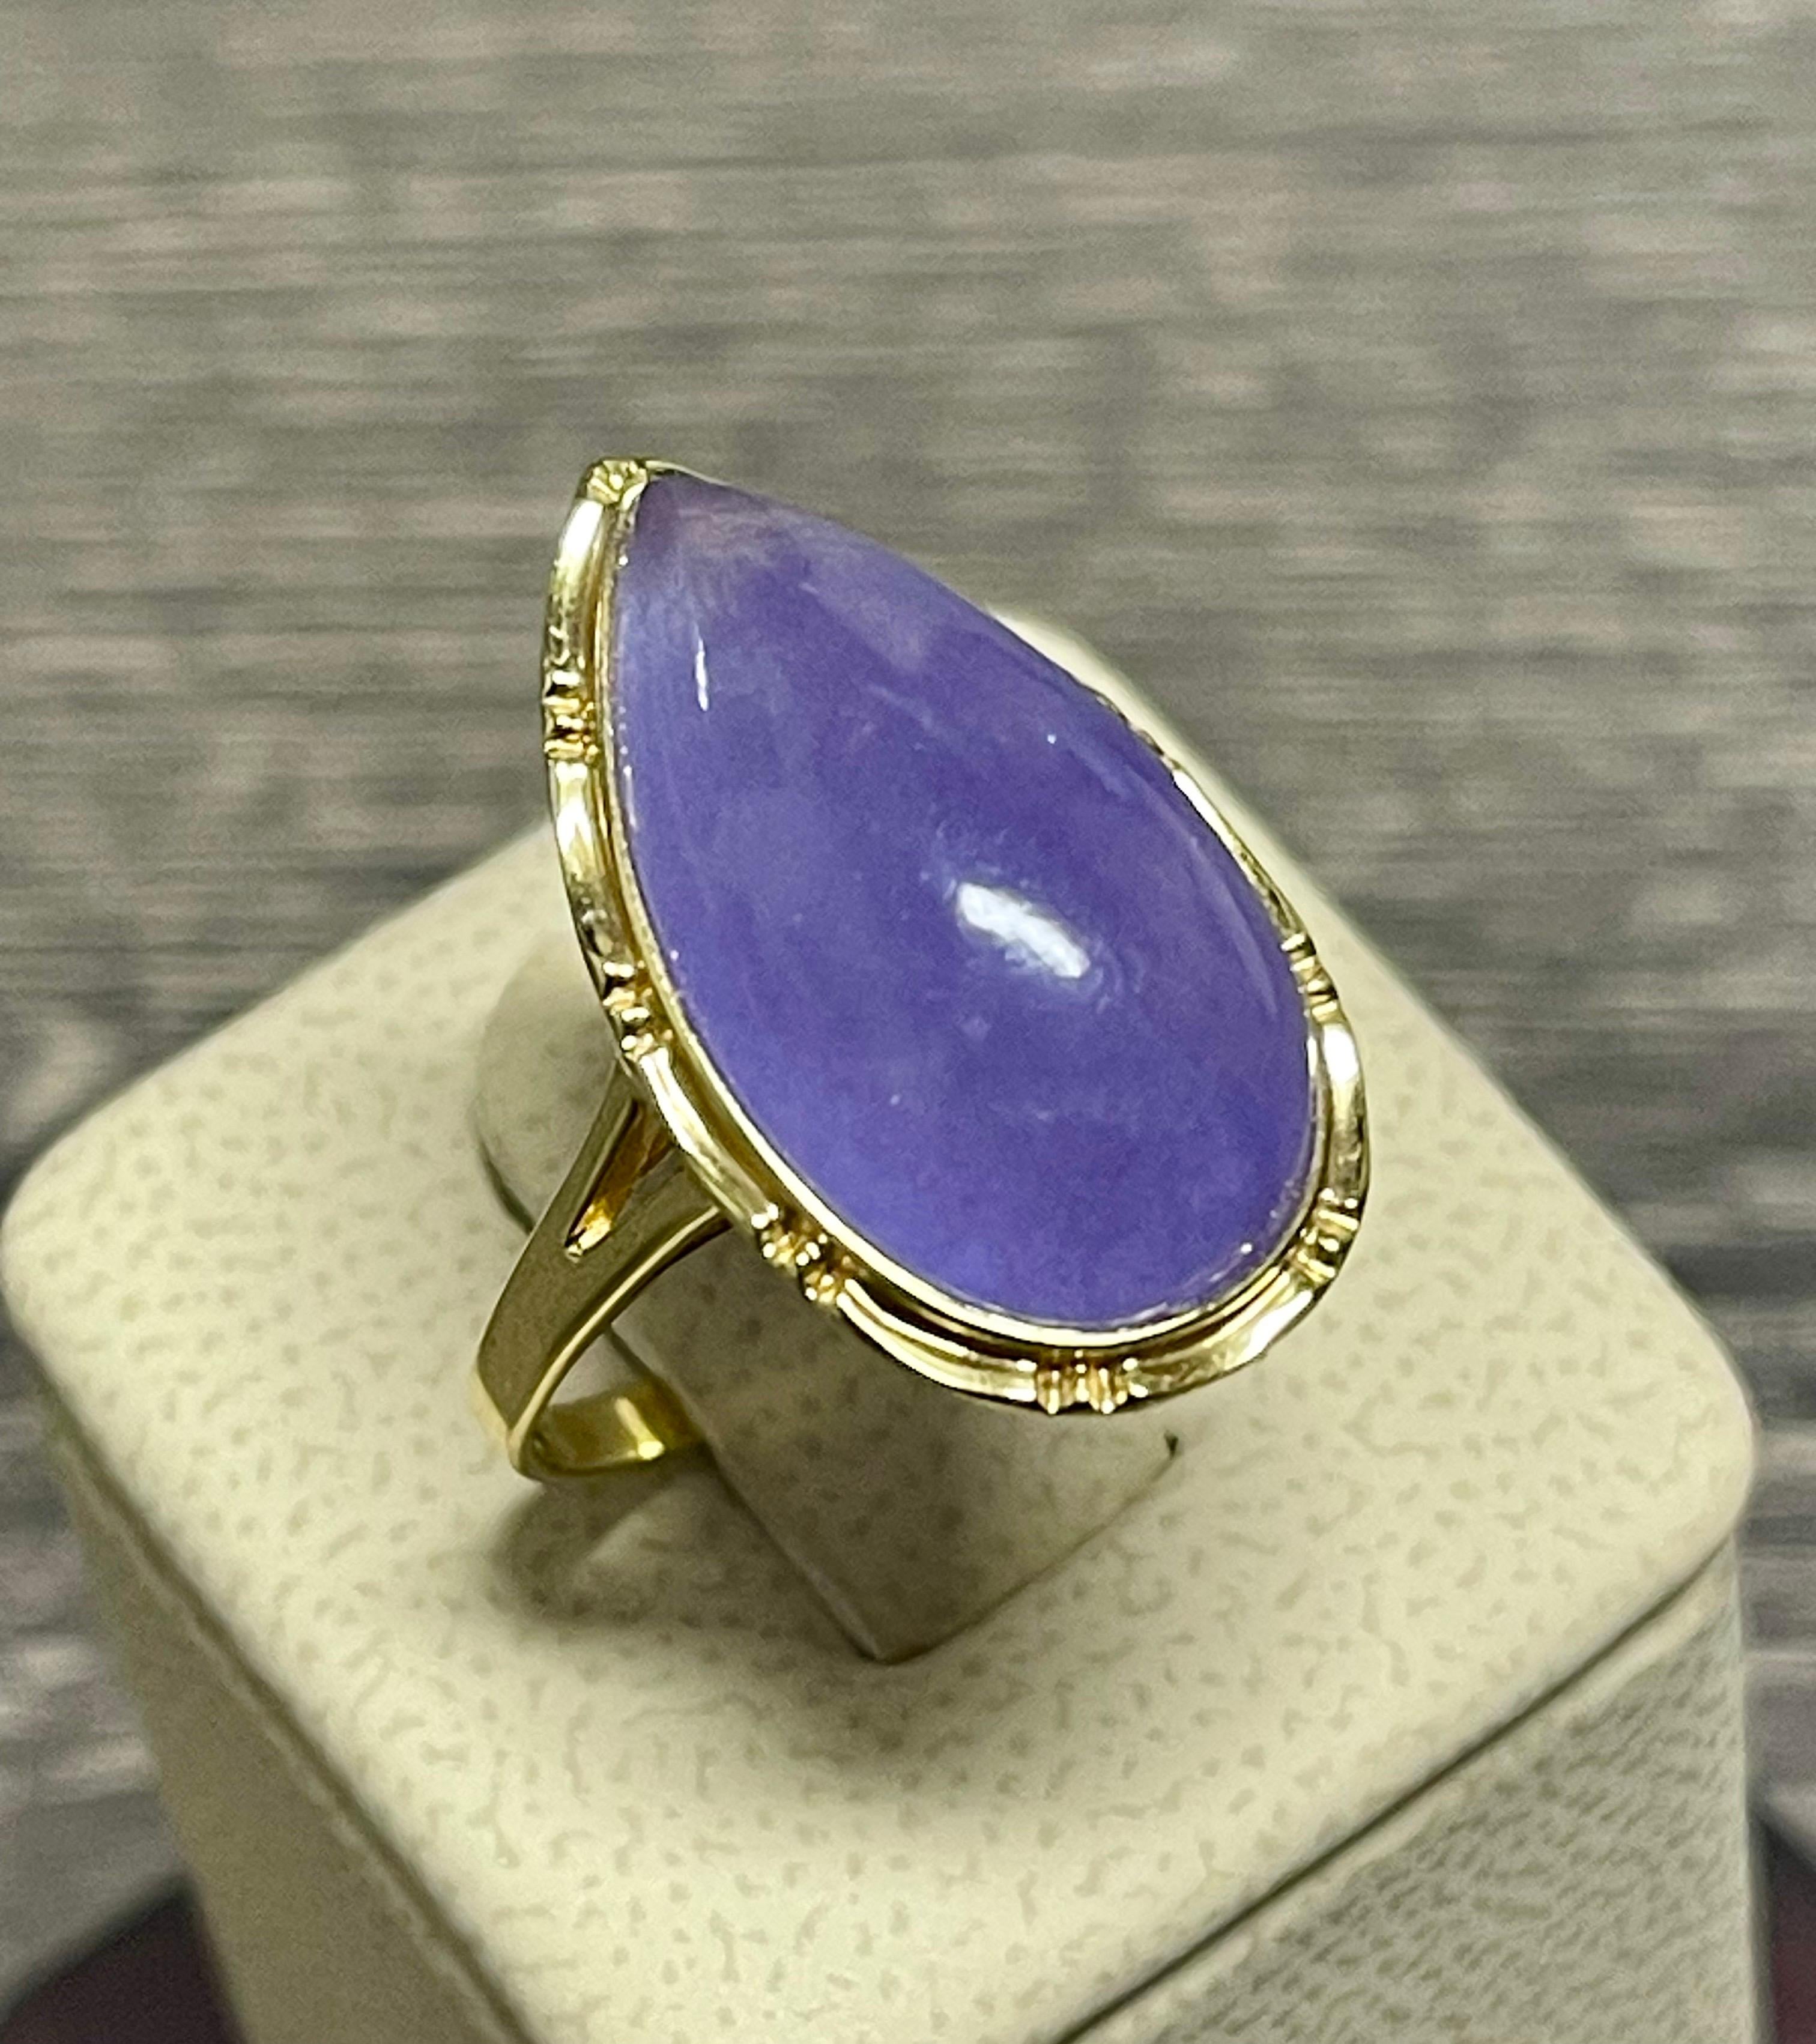 Amazing Pear Shaped Cabochon Amethyst Ring In 14k For Sale 1